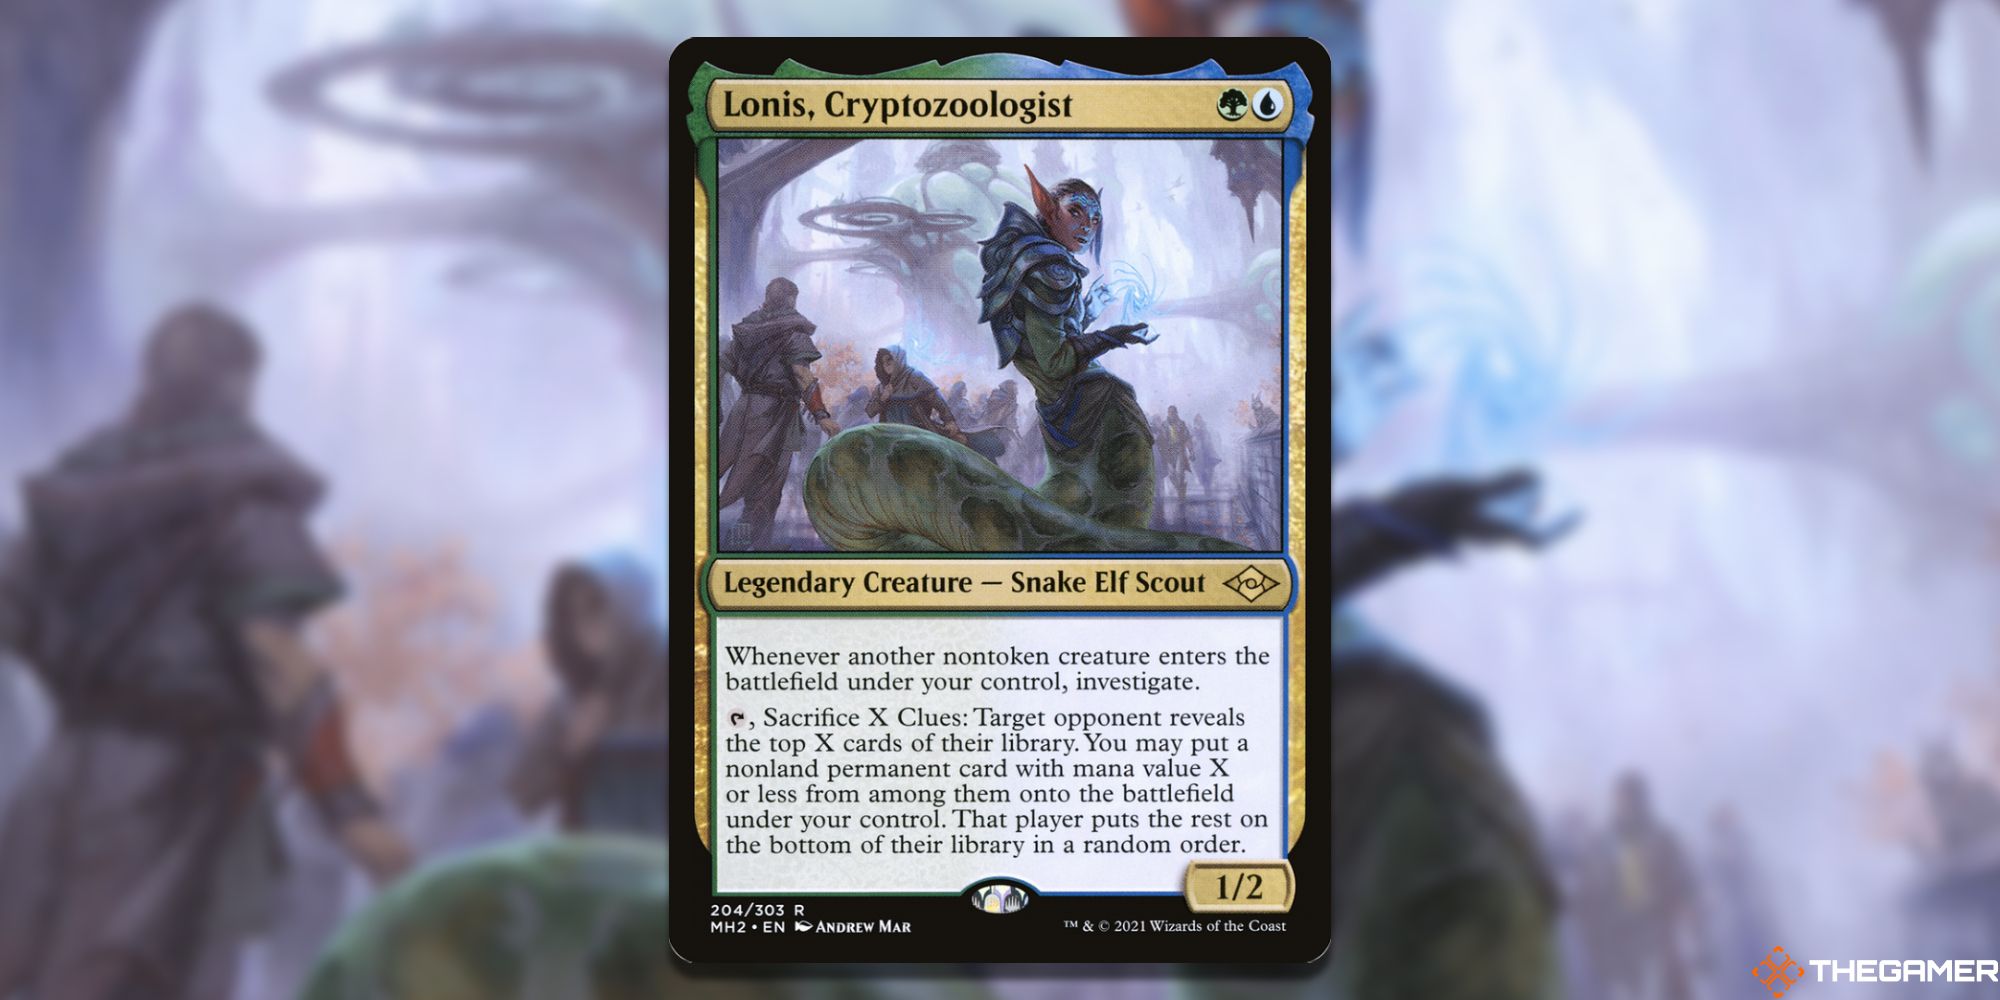 Image of the Lonis, Cryptozoologist card in Magic: The Gathering, with art by Andrew Mar